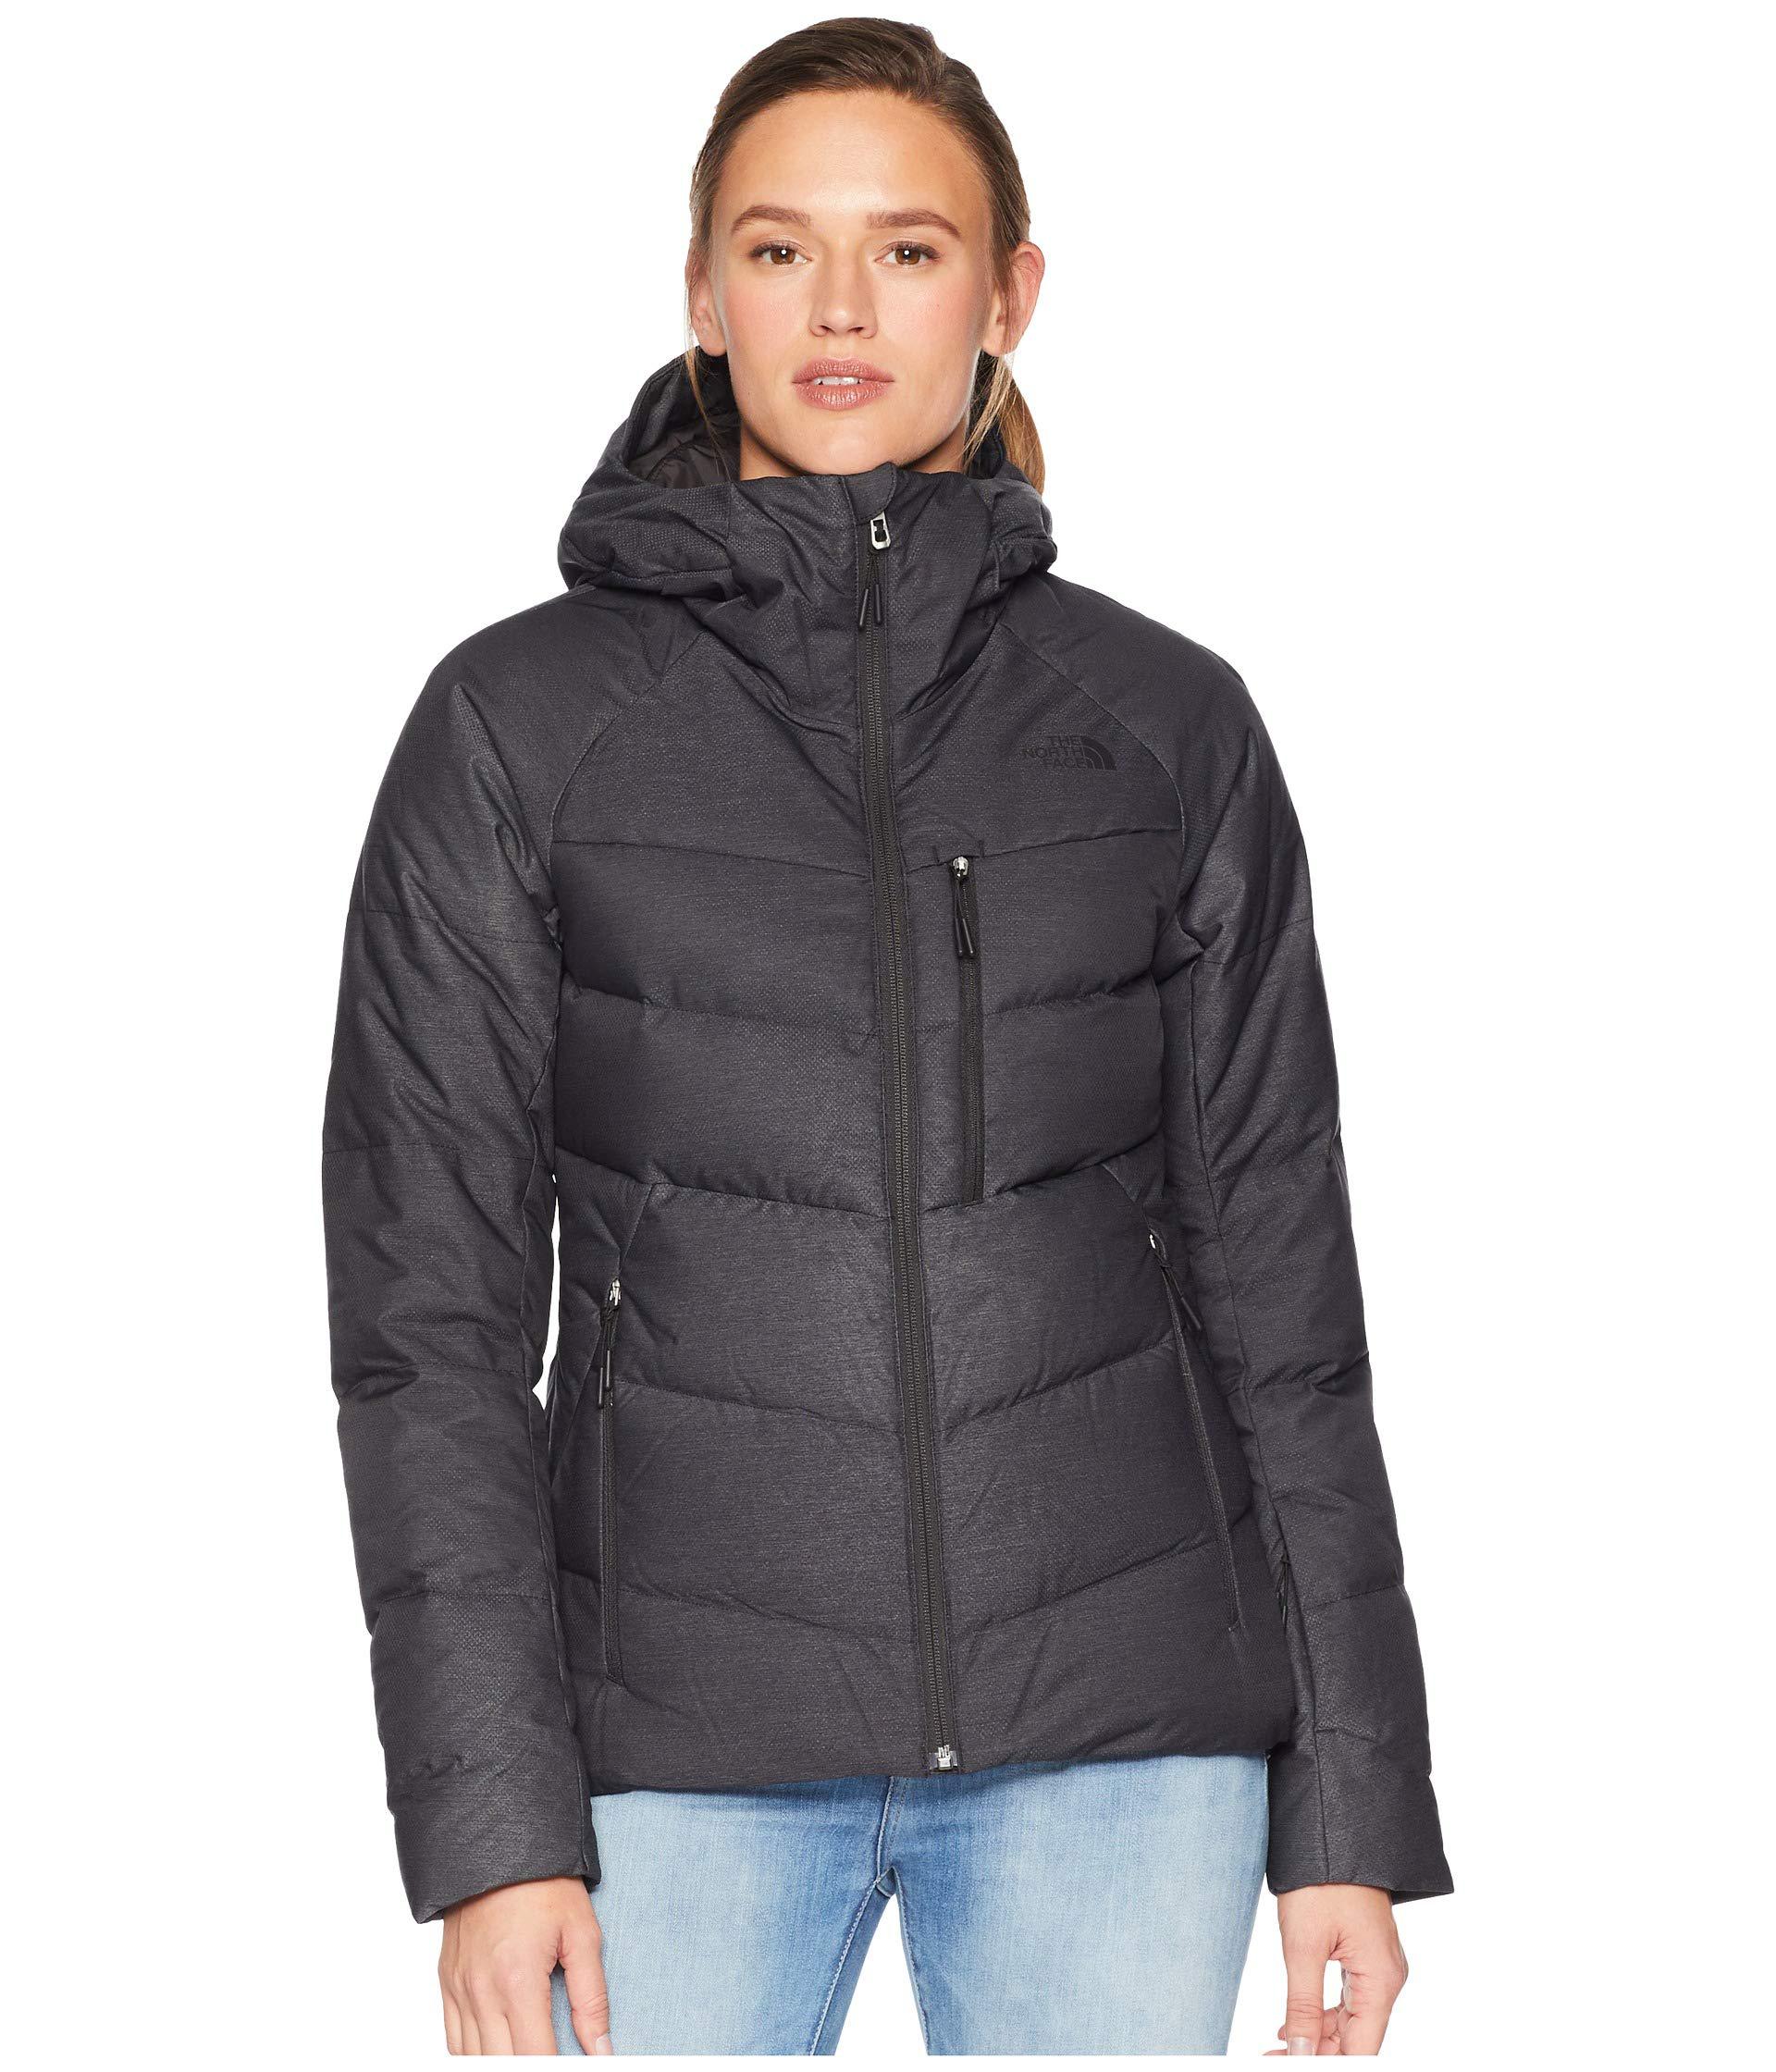 north face women's heavenly down jacket